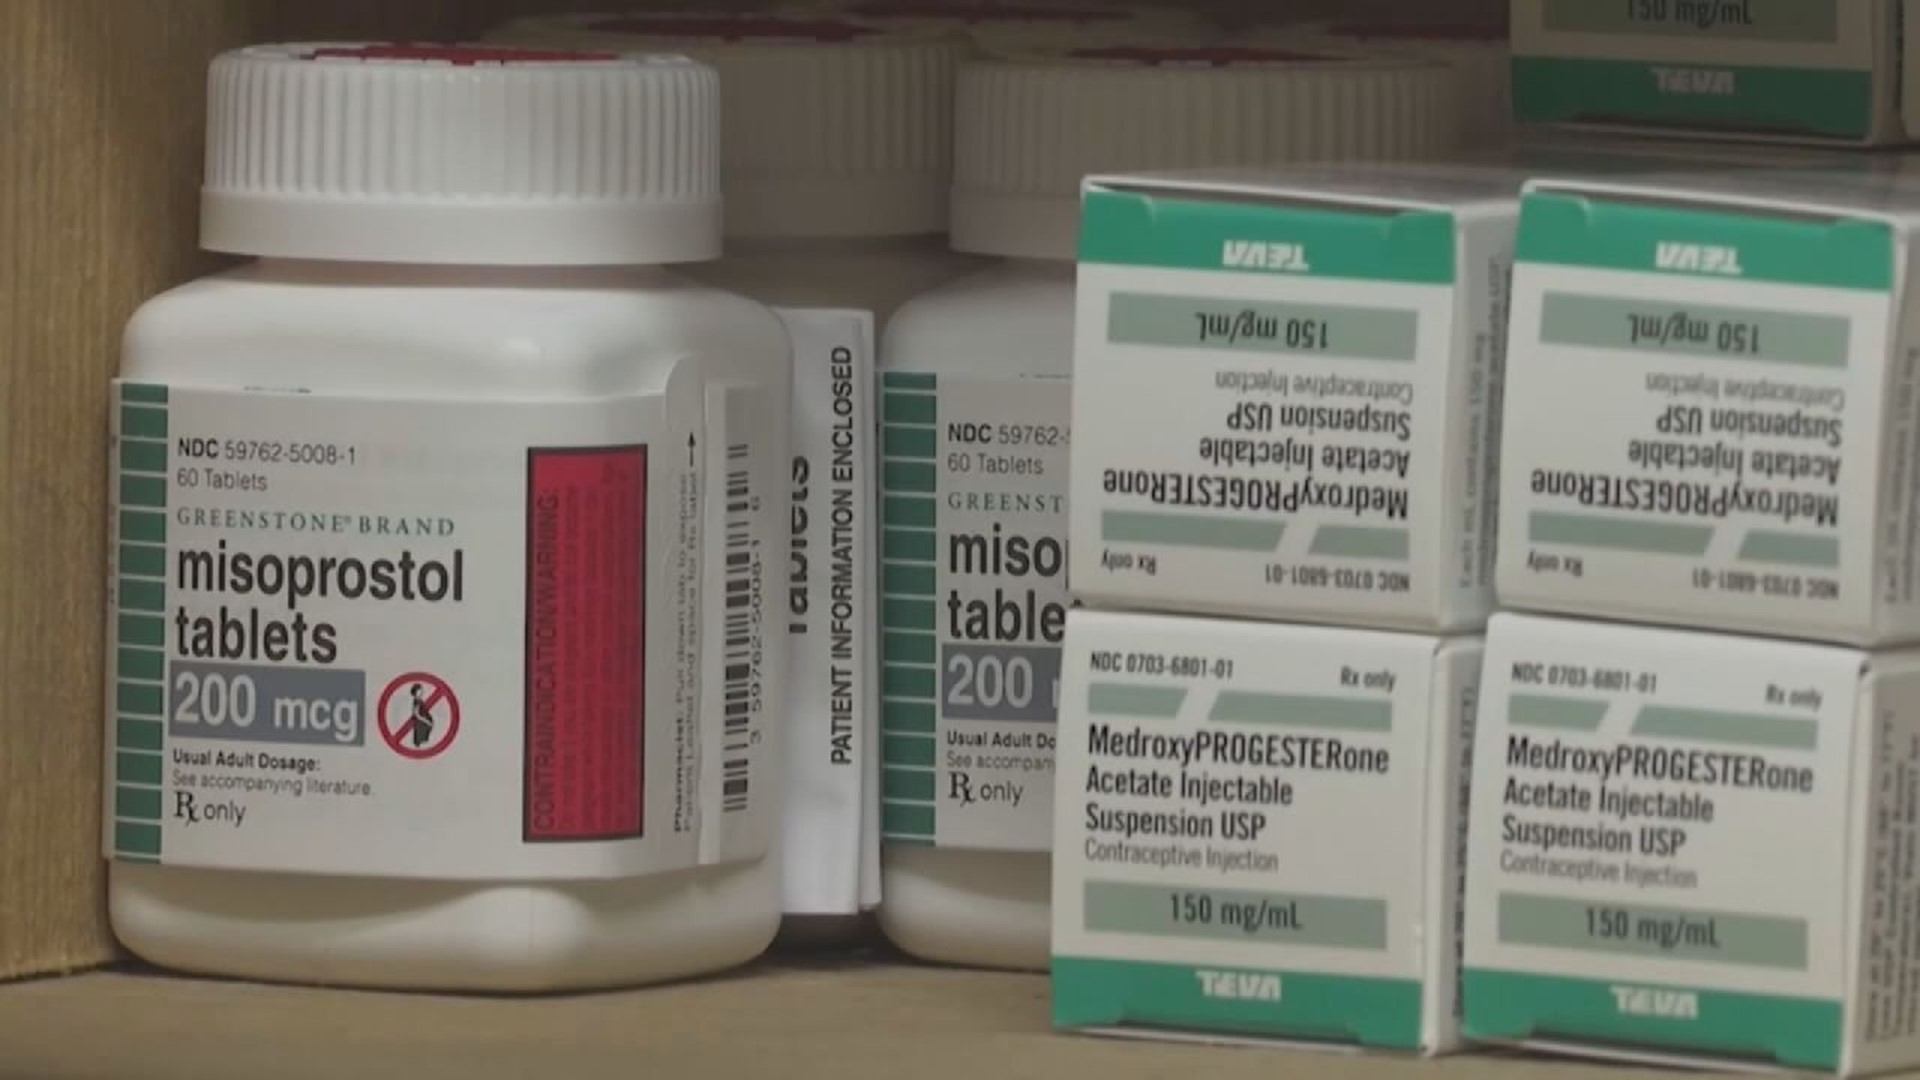 A federal judge in Texas will soon rule on a lawsuit that aims to ban mifepristone, the first of two pills used in the medication abortion process.